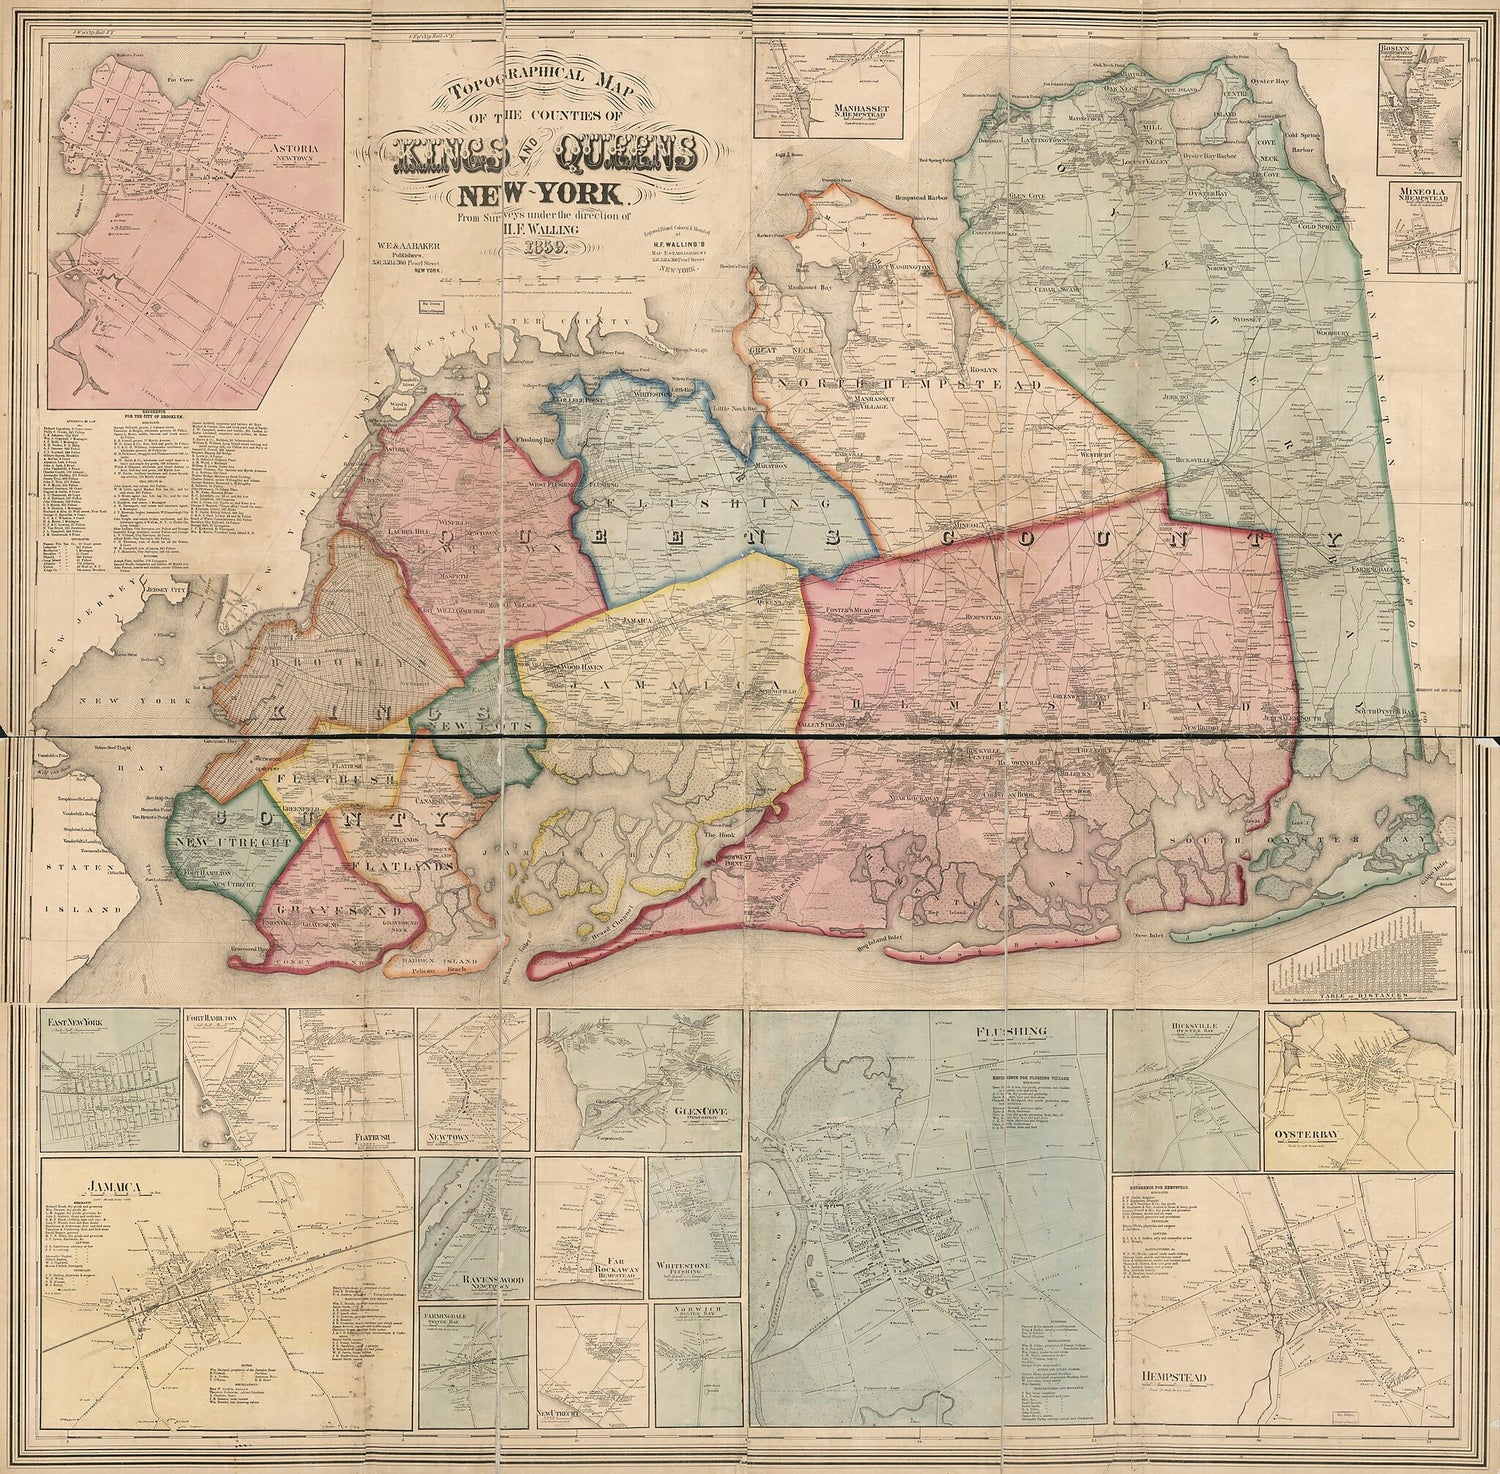 This old map of Topographical Map of the Counties of Kings and Queens, New York from 1859 was created by  H.F. Walling&